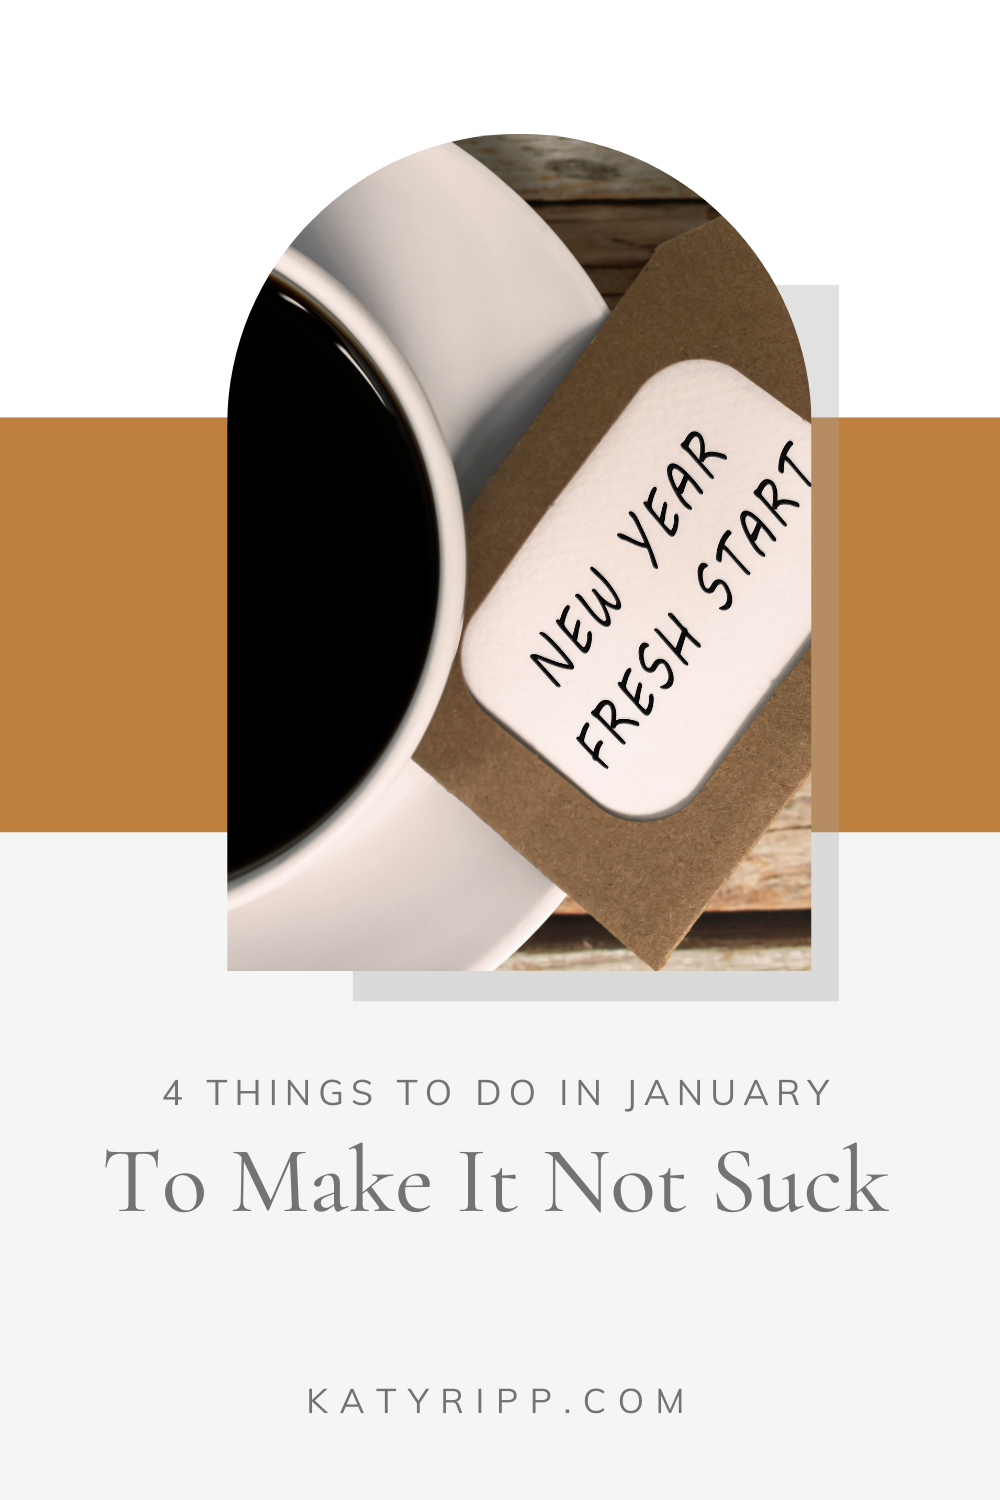 4 Things to Do in January…